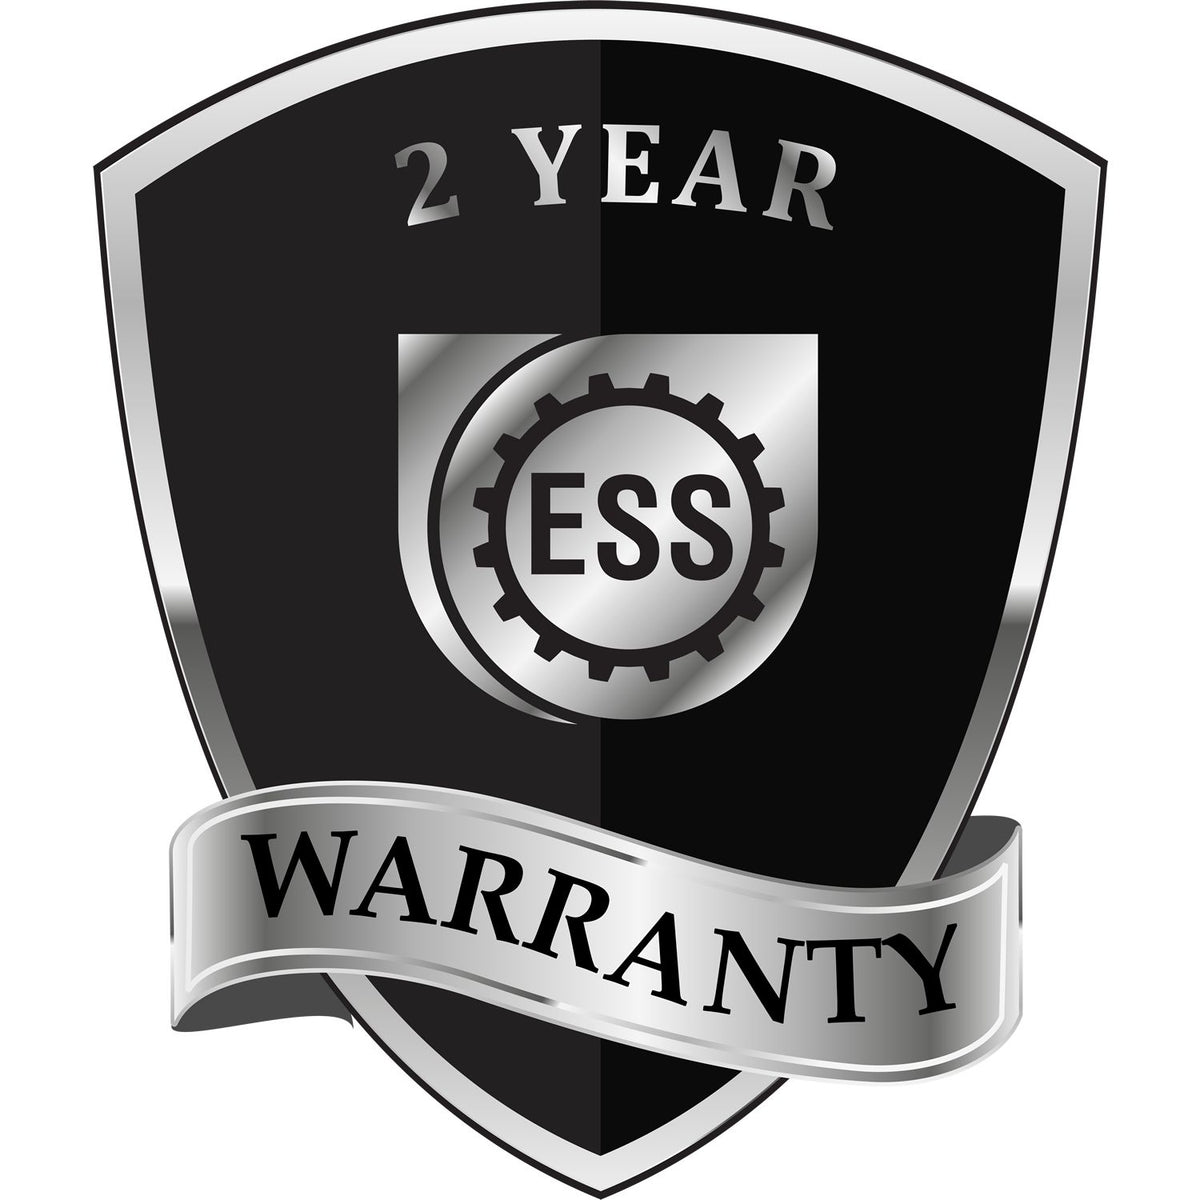 A black and silver badge or emblem showing warranty information for the Hybrid Guam Geologist Seal